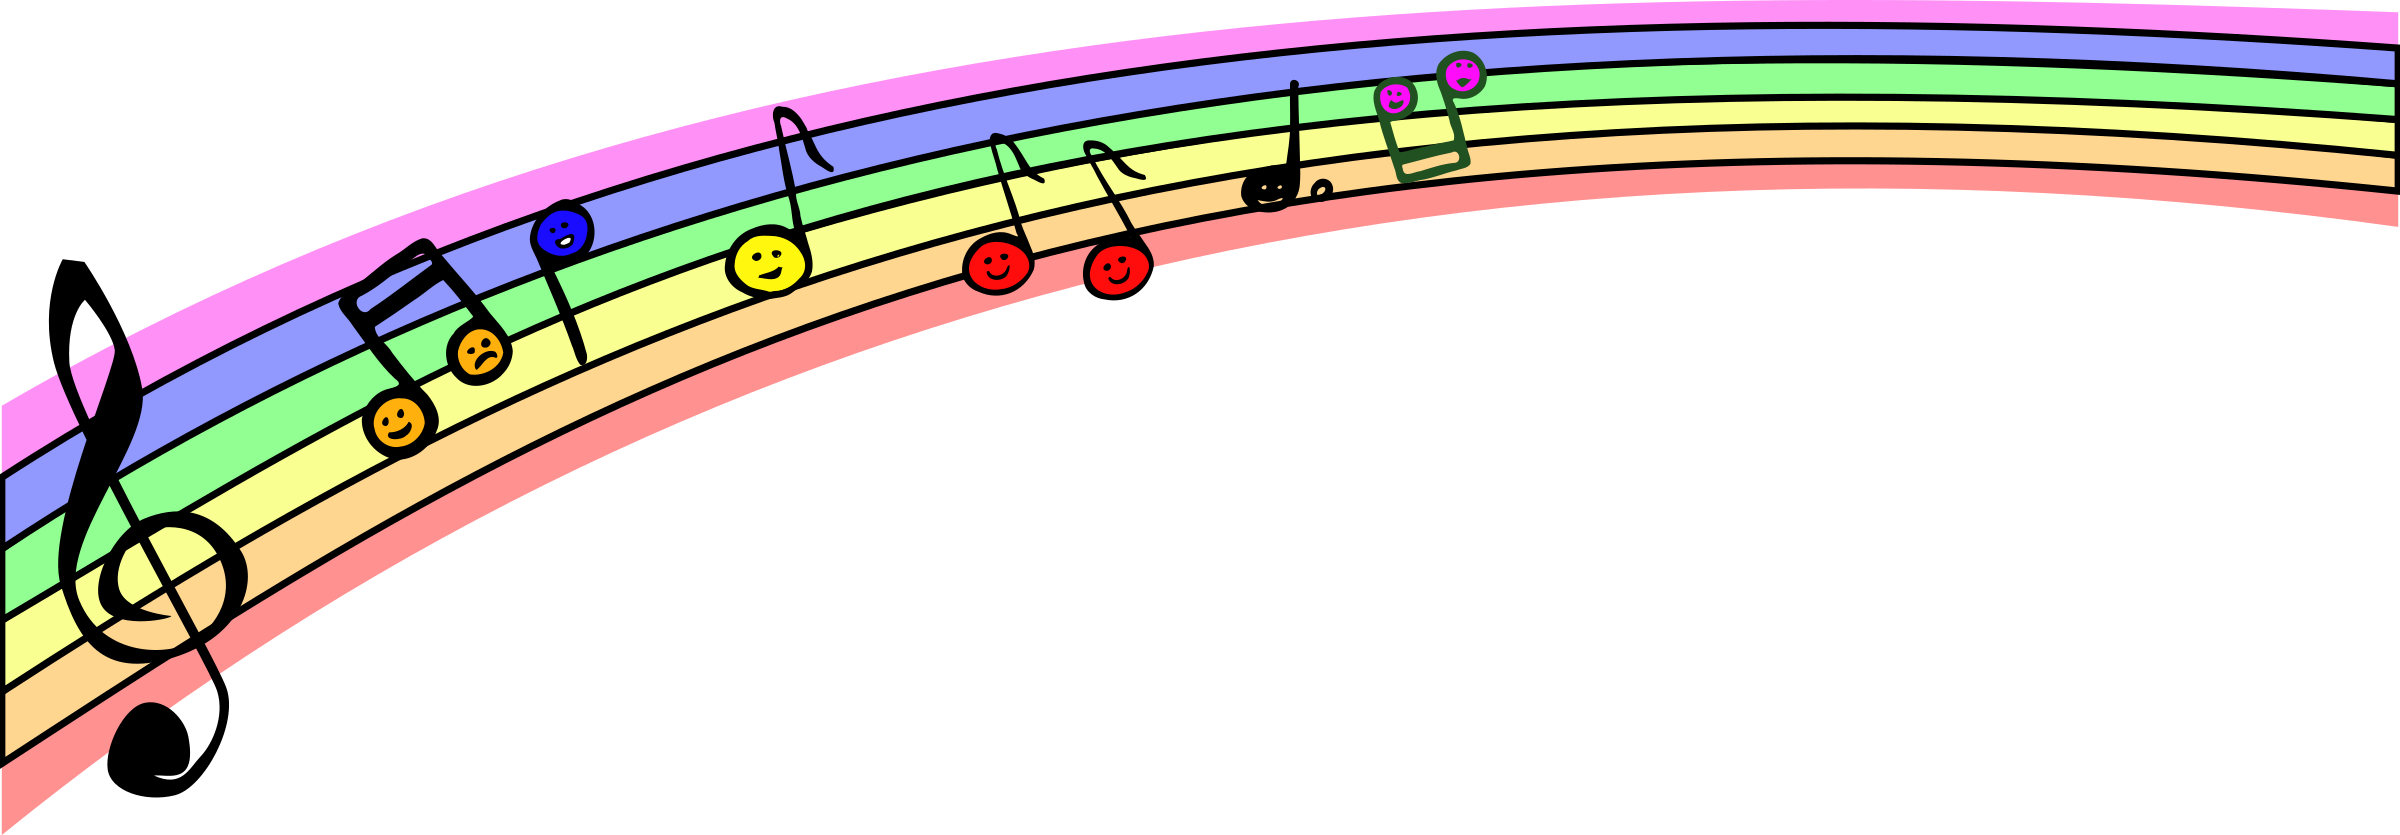 clipart music notes border - photo #29